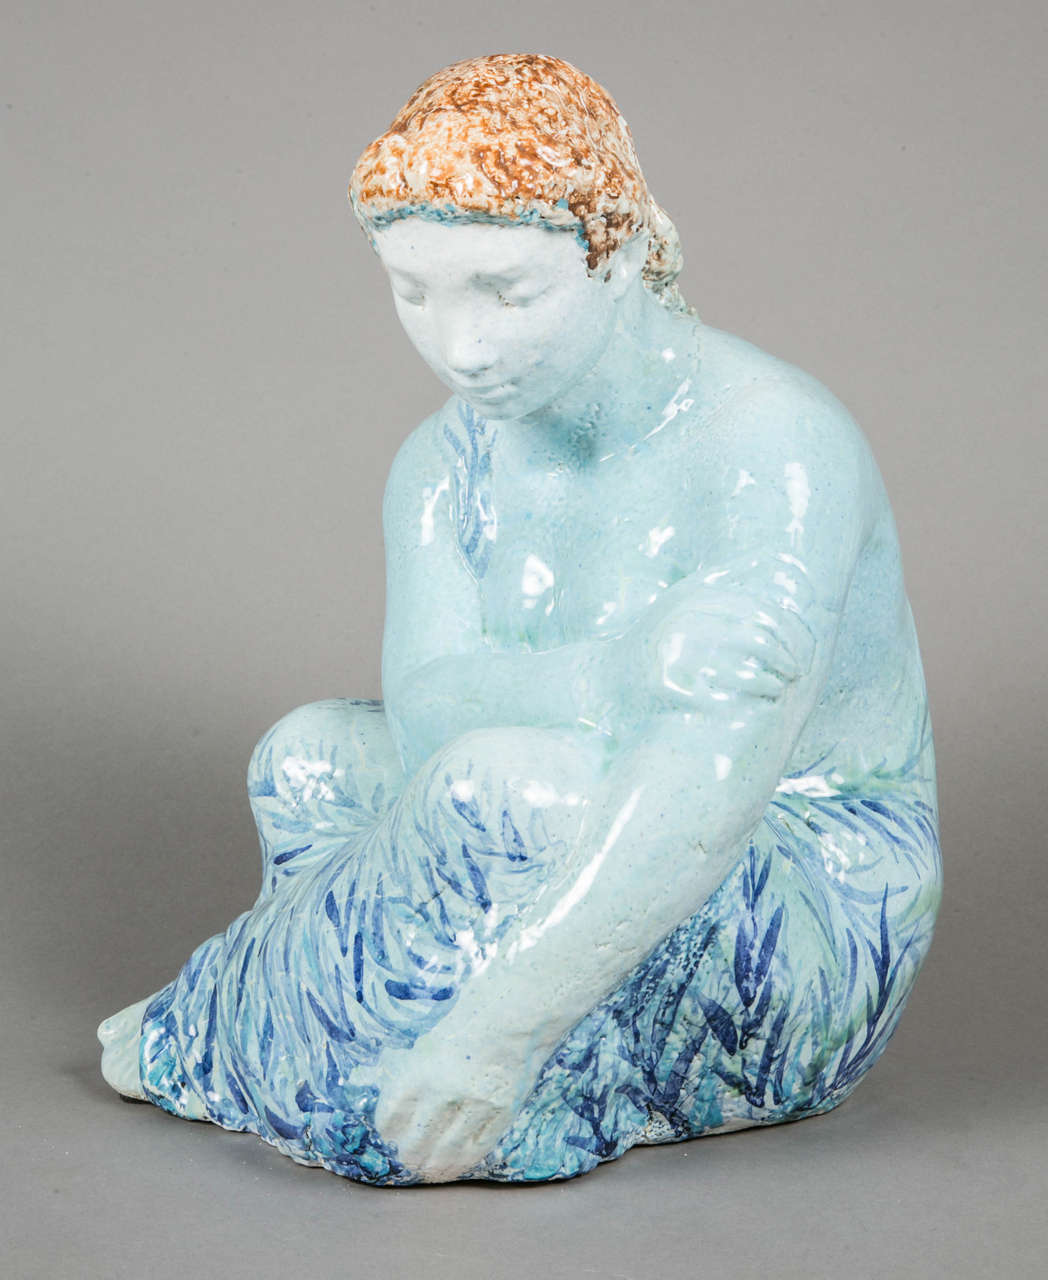 Important blue enameled ceramic sculpted sitting woman by Odette Lepeltier (1914-2006).
Signed. 

After studying painting and sculpture at the Paris Beaux-Arts school and in the Primavera workshop with Colette Gueden, Odette Lepeltier chose to